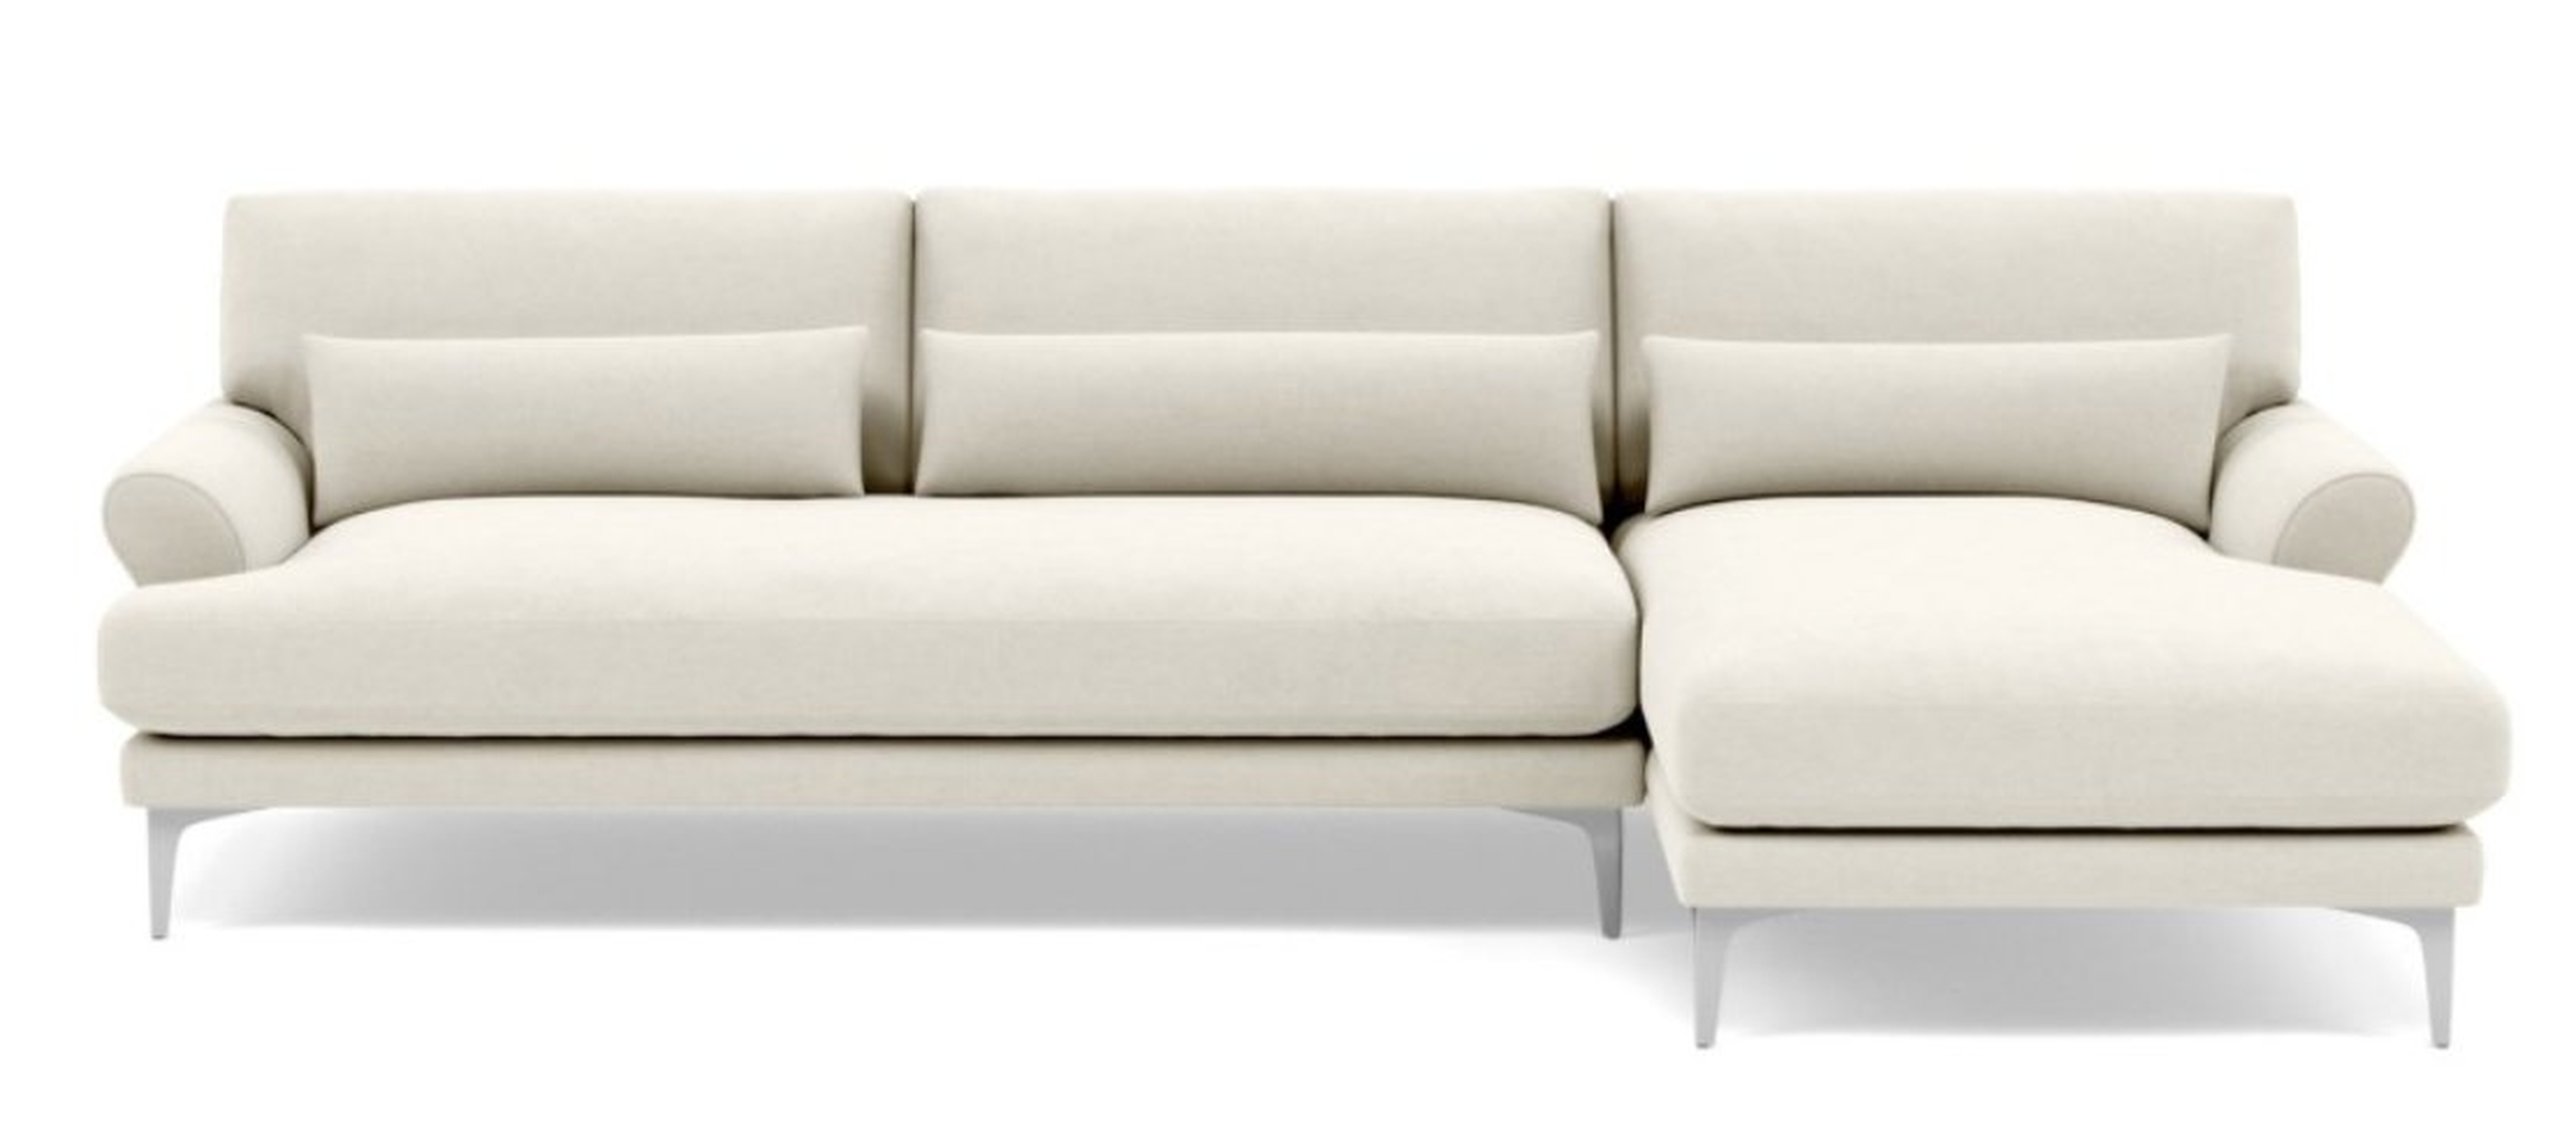 Maxwell 106" Sectional with Right Chaise - Chalk Heathered Weave - Chrome Plated Sloan L Leg -  Long Chaise - Bench Cushion - Interior Define